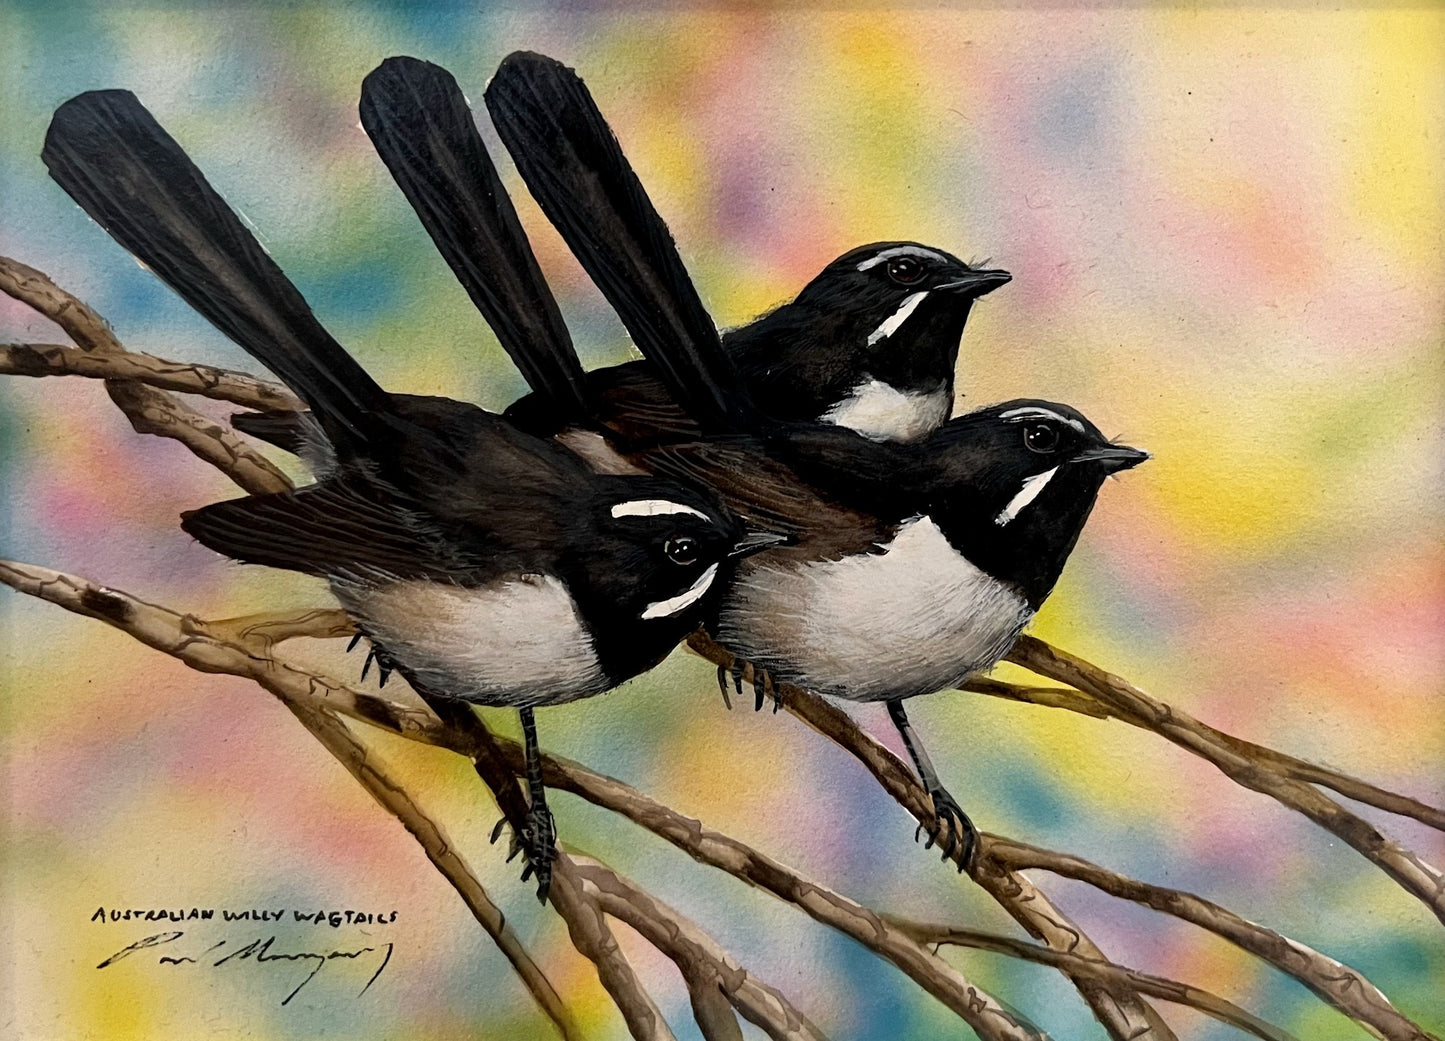 Australian Willy Wagtails, Where's Willy?